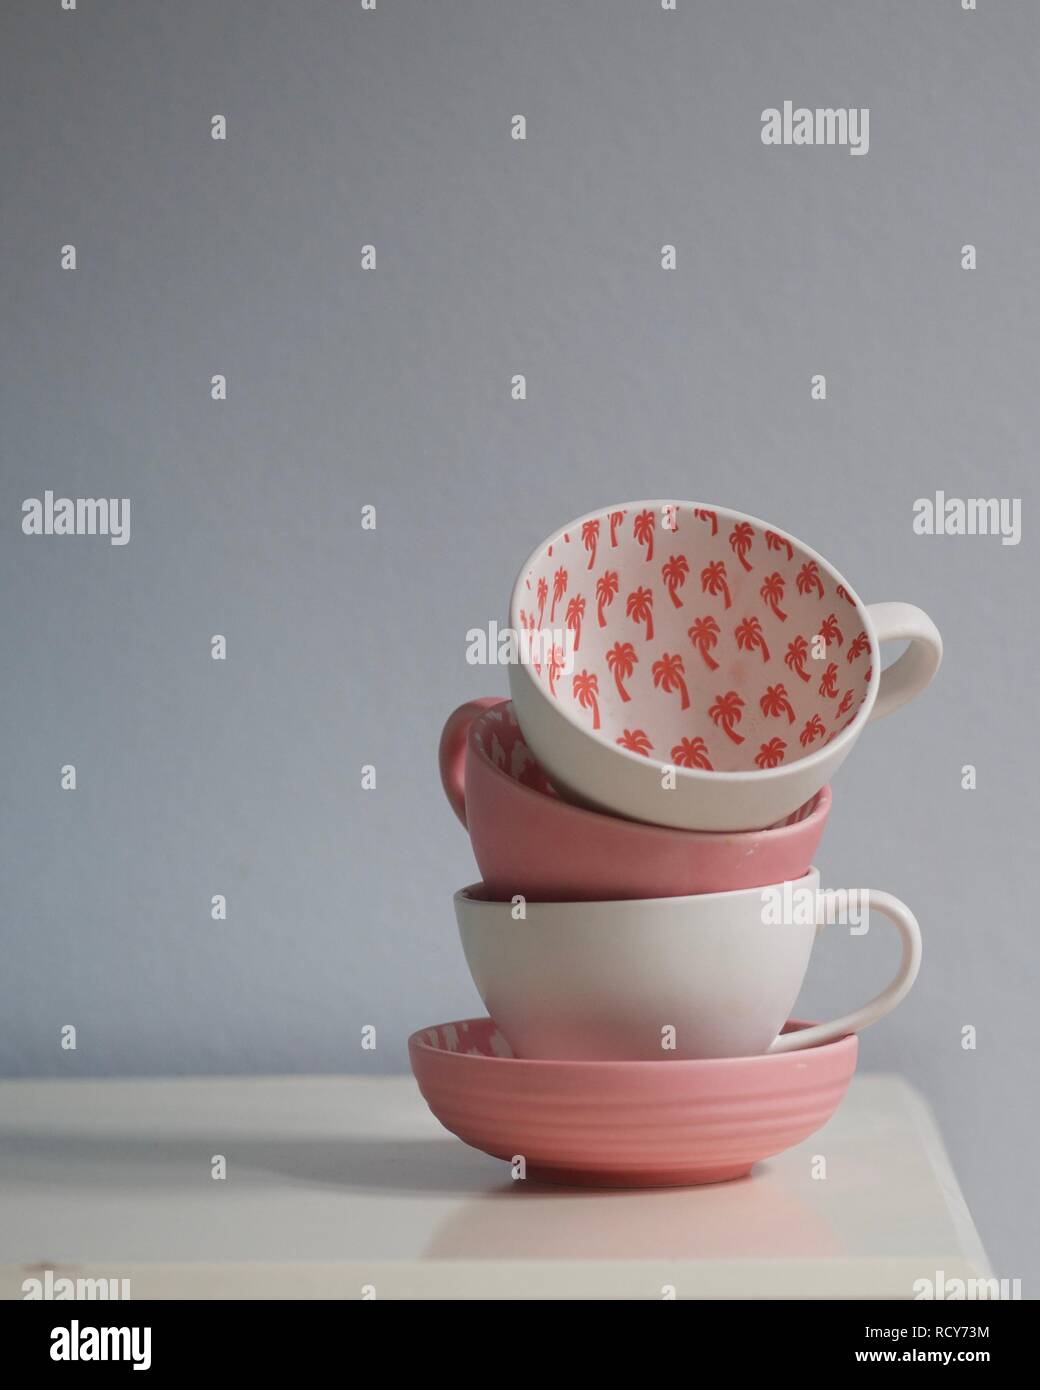 https://c8.alamy.com/comp/RCY73M/close-up-of-coral-pink-and-white-tea-cups-stacked-on-white-table-cups-decorated-with-palm-tree-pattern-pantone-color-of-the-year-2019-living-coral-RCY73M.jpg